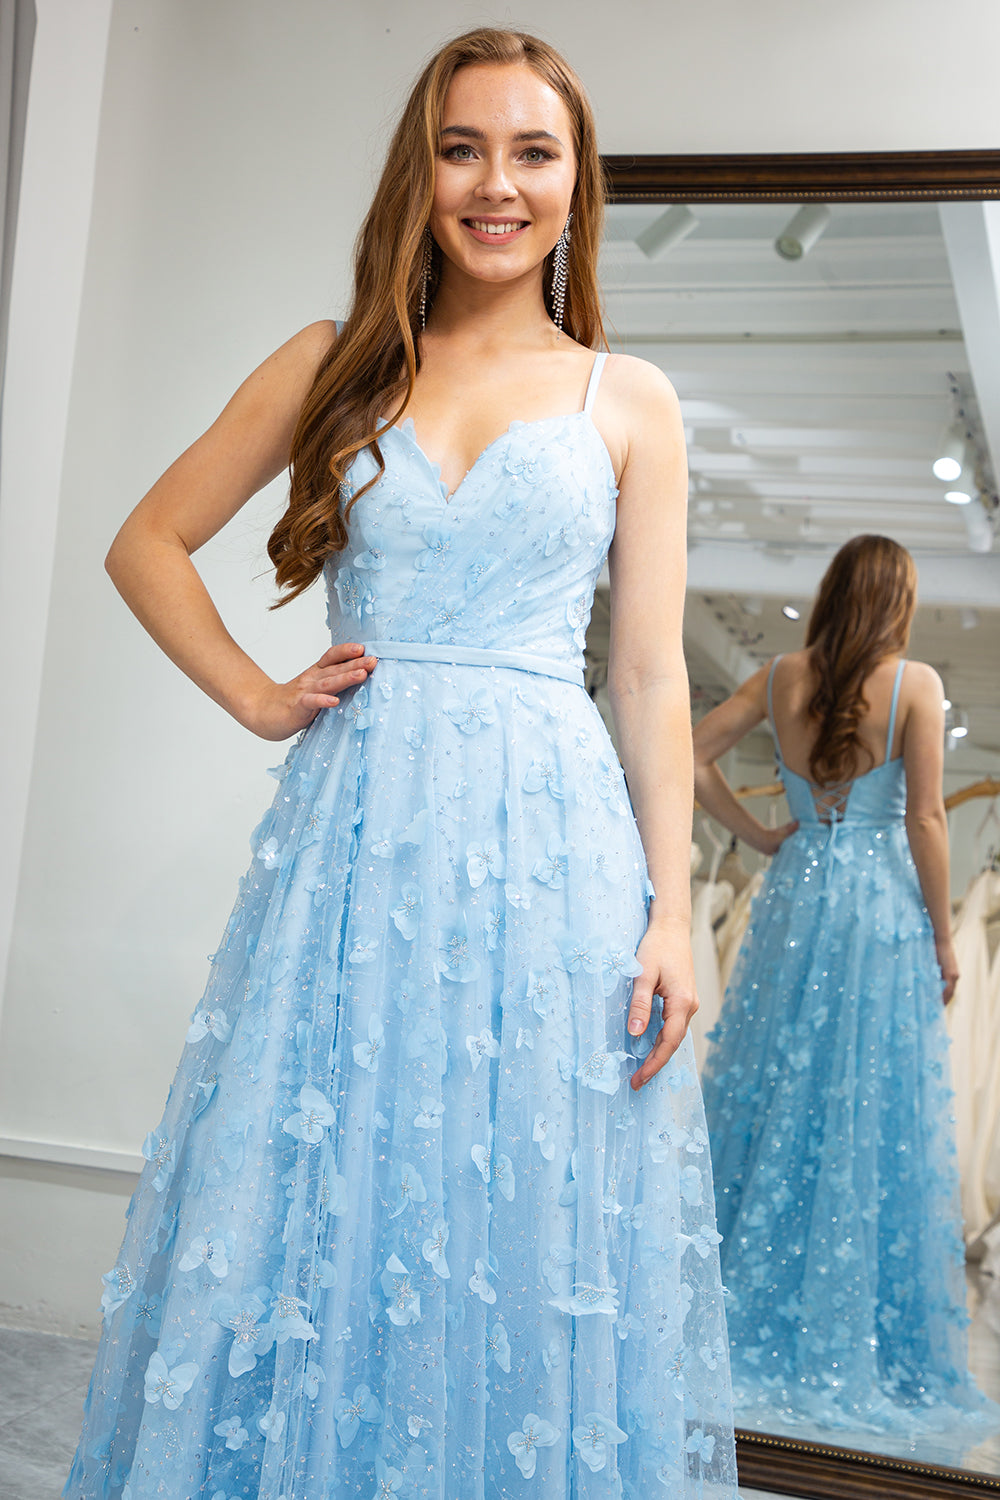 Sky Blue A Line Spaghetti Straps Beaded Prom Dress with 3D Butterflies